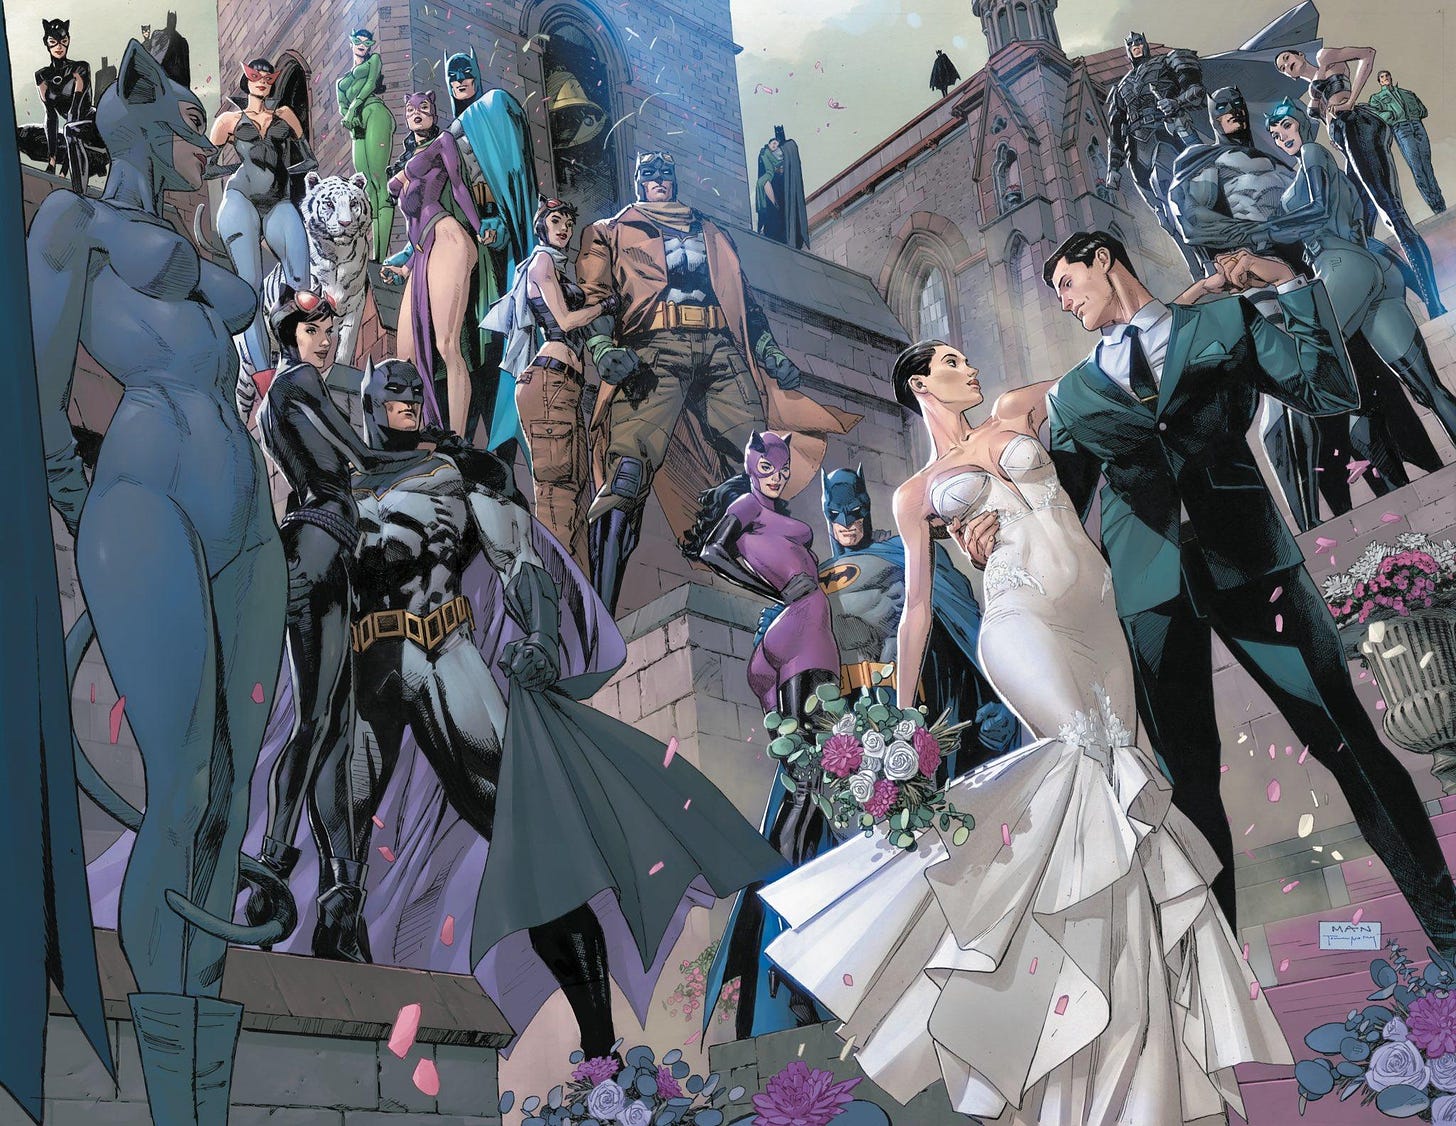 Batman/Catwoman #12 Cover Brings Iconic Looks Together for Final Issue